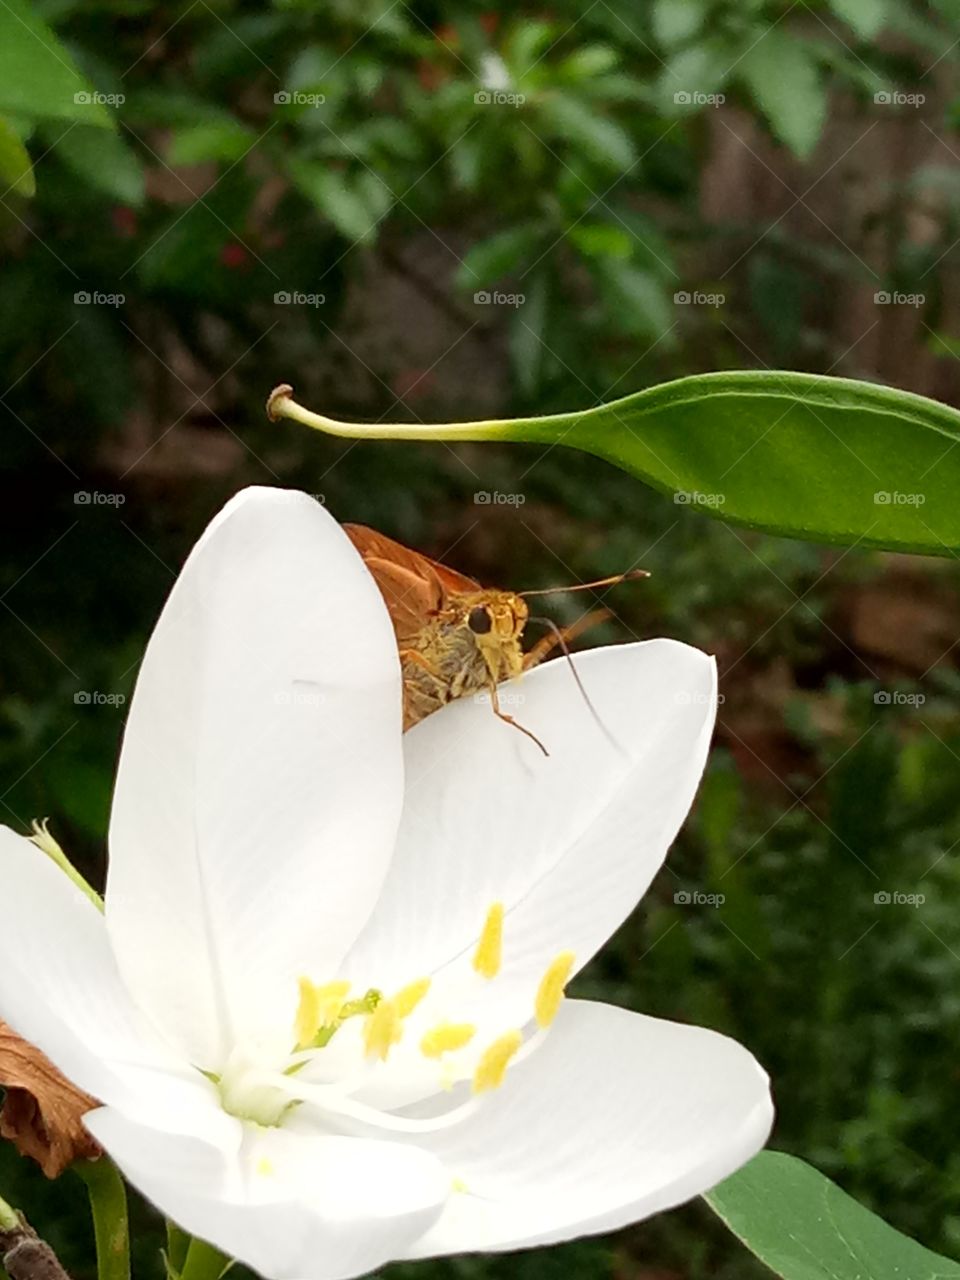 hiding with butterfly